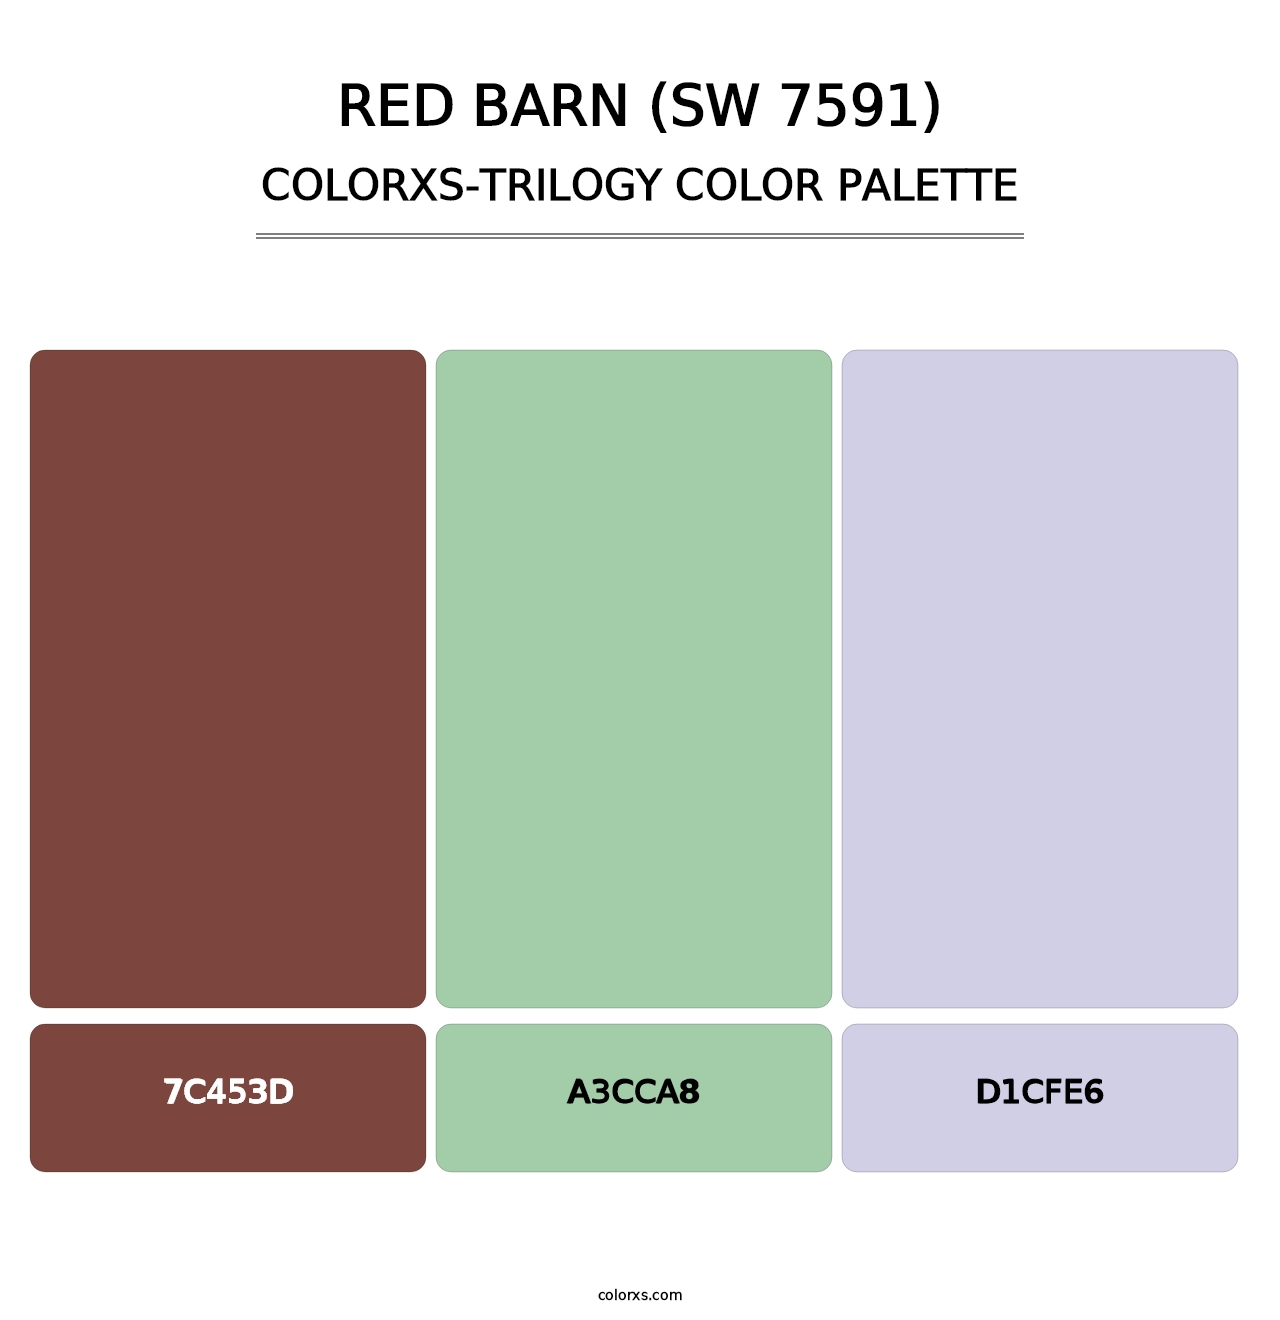 Red Barn (SW 7591) - Colorxs Trilogy Palette